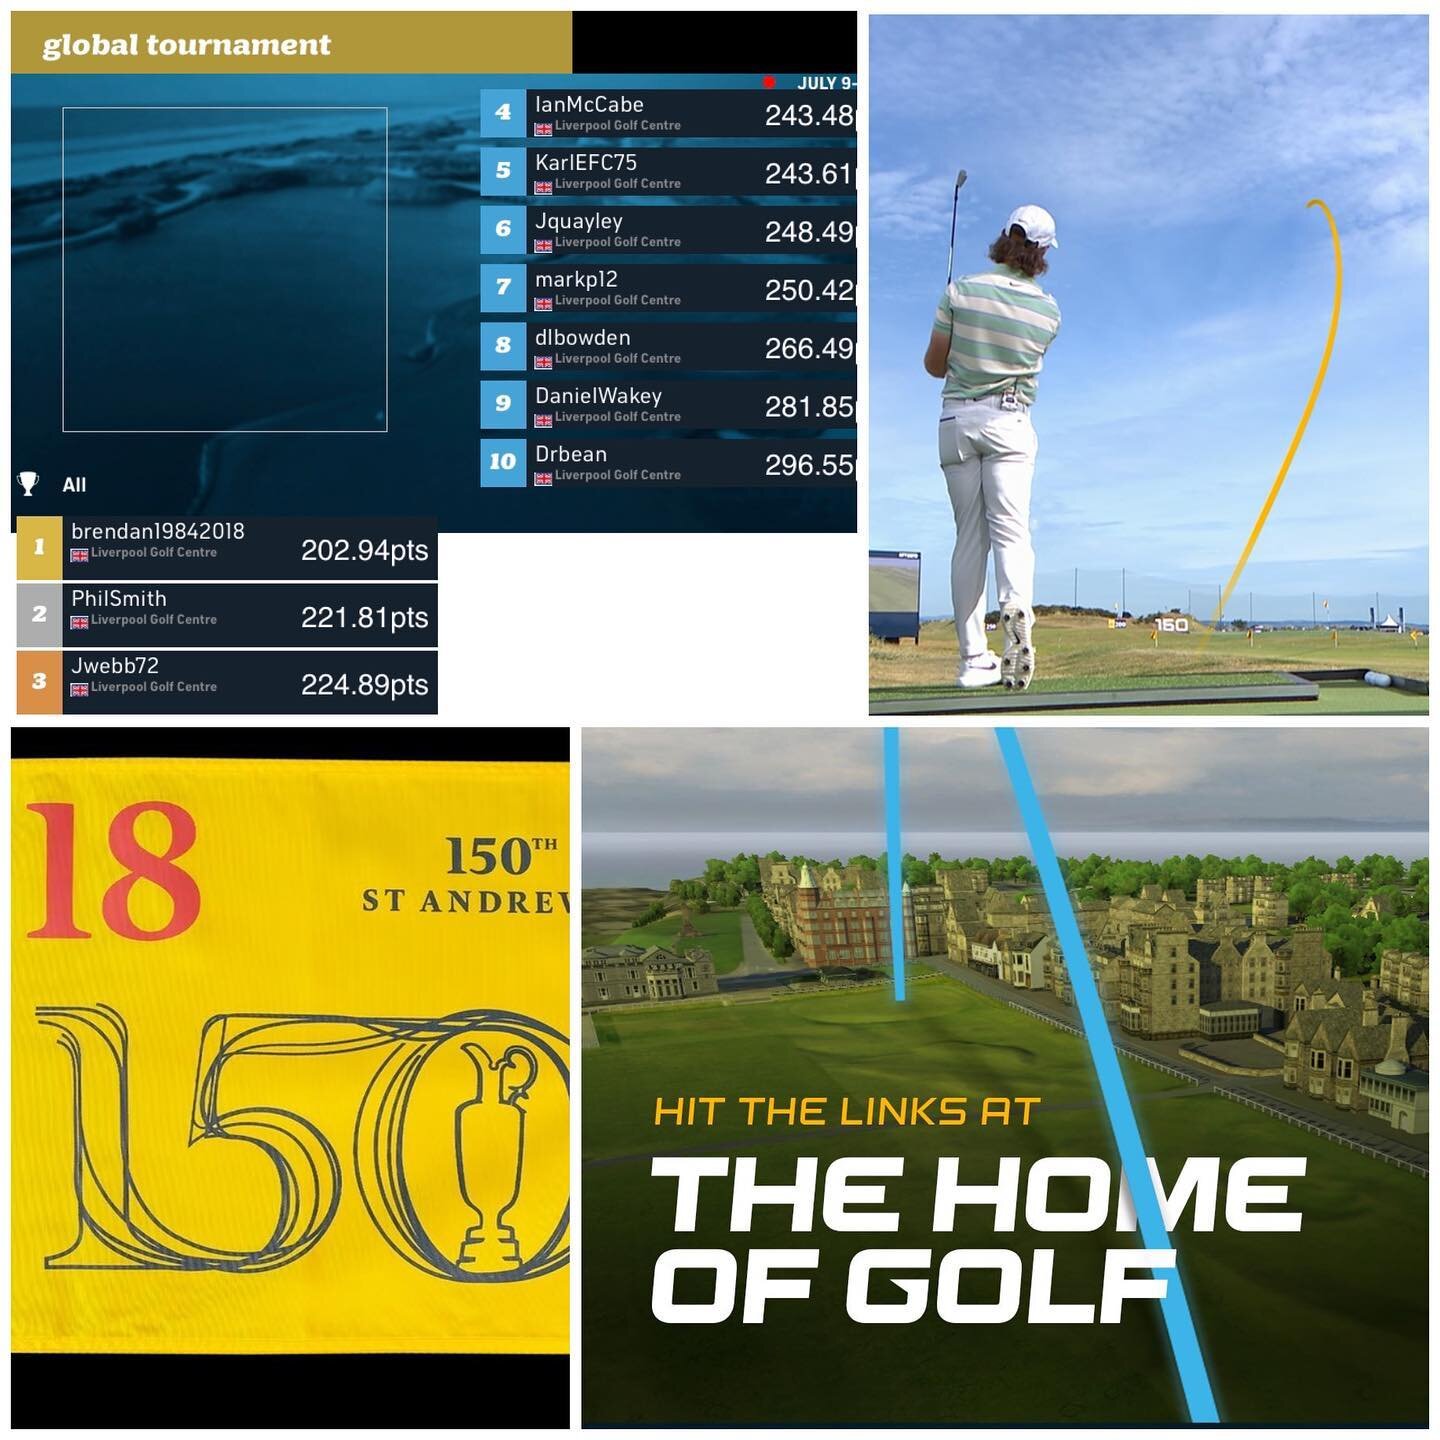 Have you tried the 9-Shot Challenge yet??? ‼️We&rsquo;re inviting everybody to celebrate this year&rsquo;s 150th Open at St Andrews here @liverpoolgolfcentre and enjoy the same technology @officialtommyfleetwood and his contemporaries are using on th